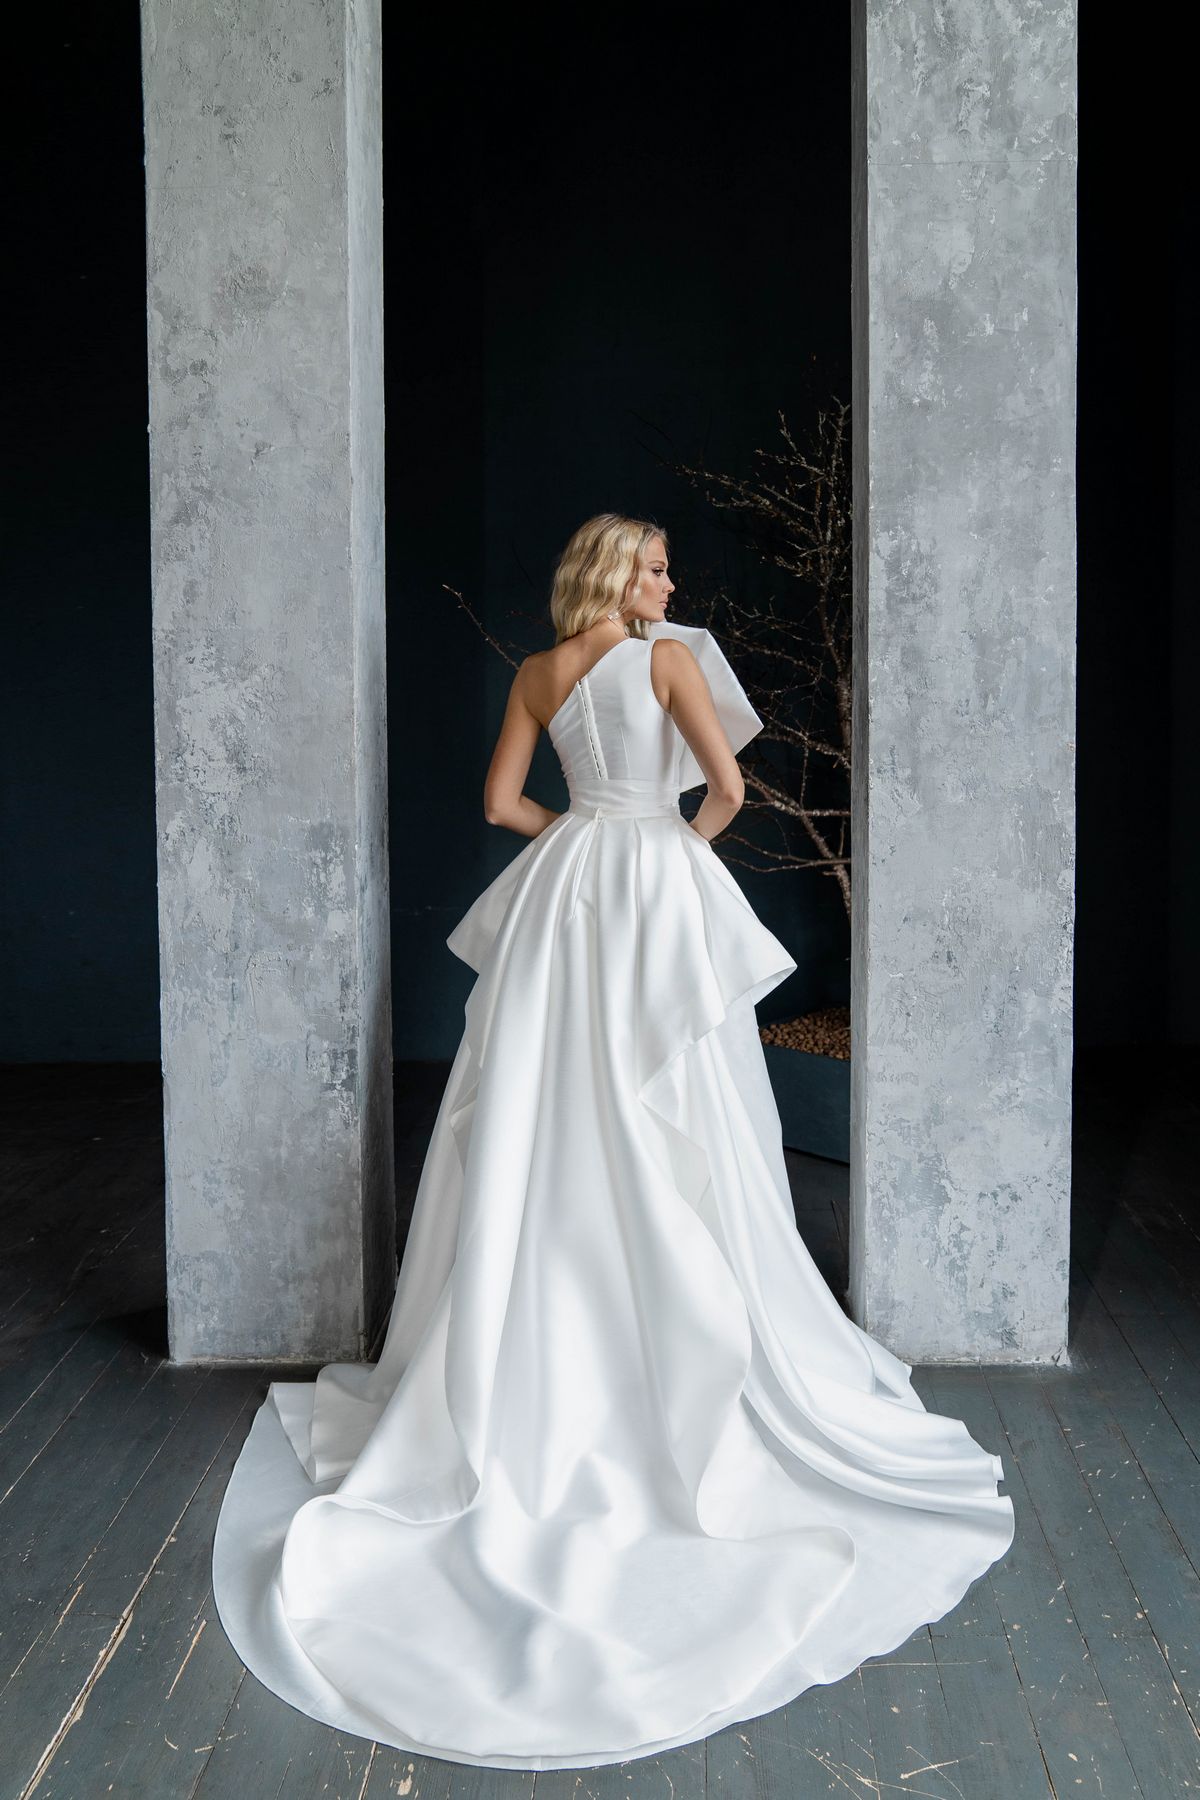 Short wedding dress Sandra with bow and feathers by rara avis at Dell'Amore Bridal, auckland, nz 8